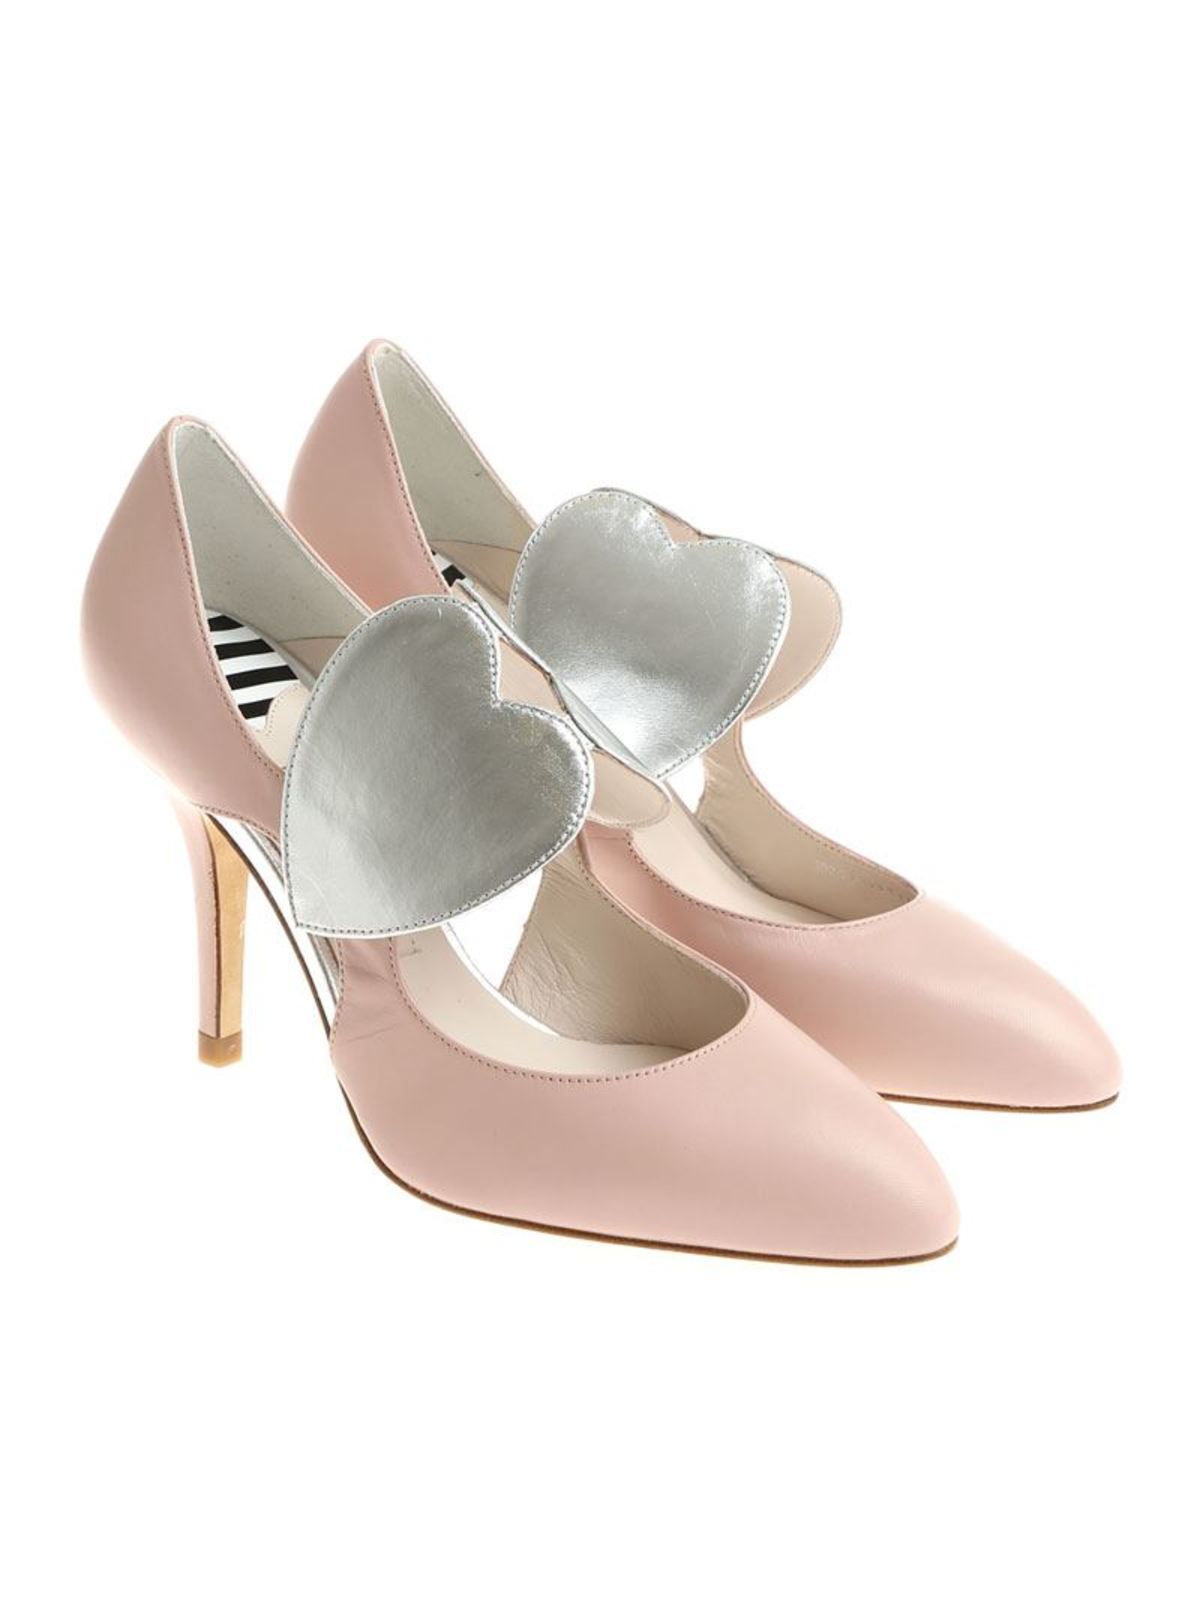 Lulu Guinness Cut-out Detailed Pumps In Rosado